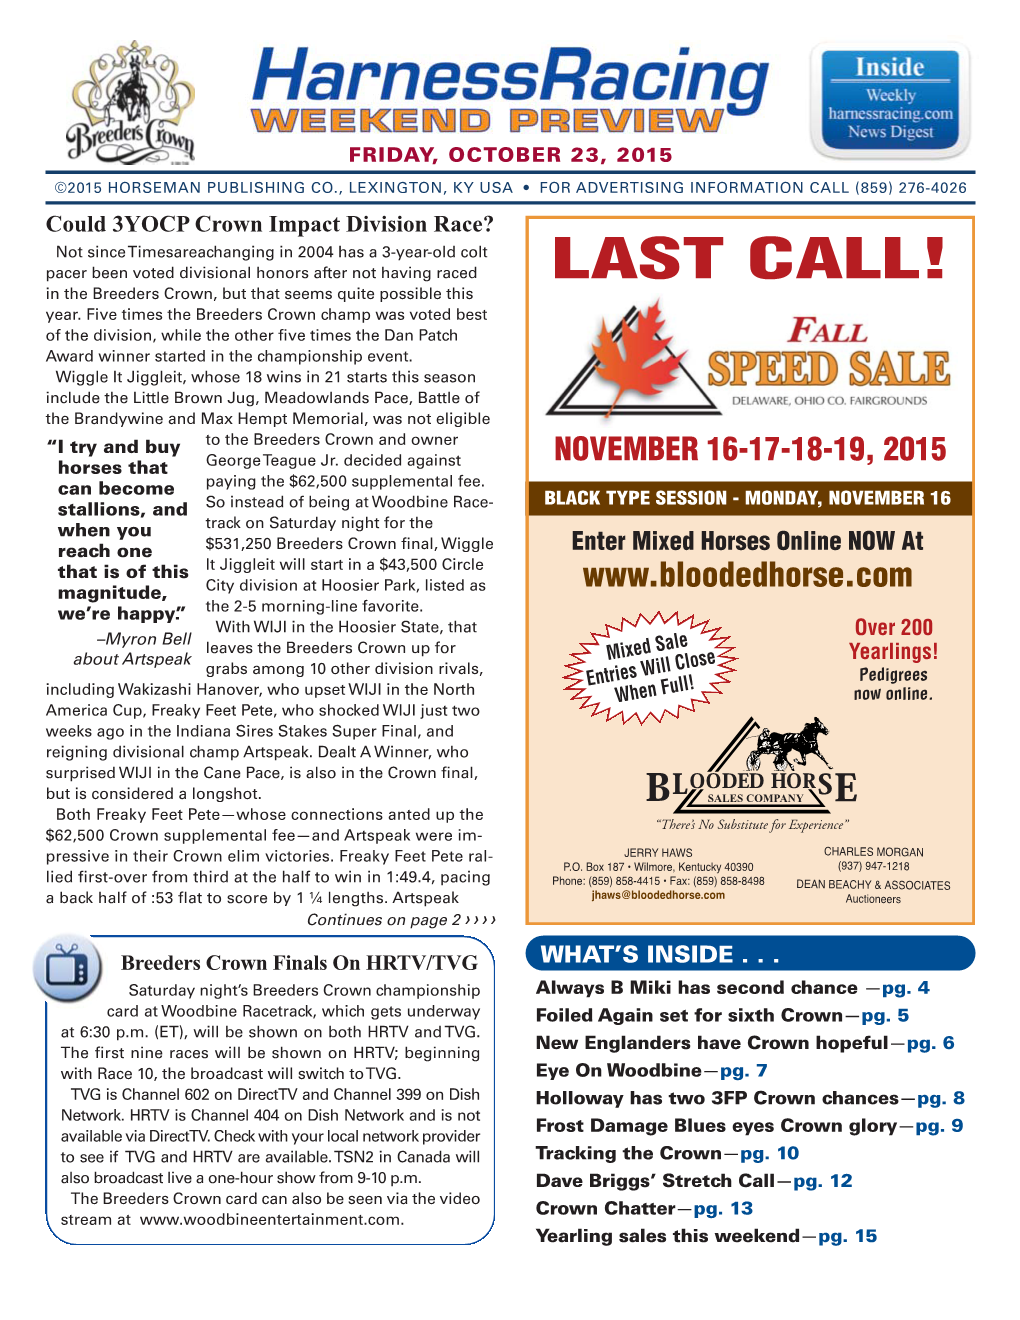 LAST CALL! in the Breeders Crown, but That Seems Quite Possible This Year